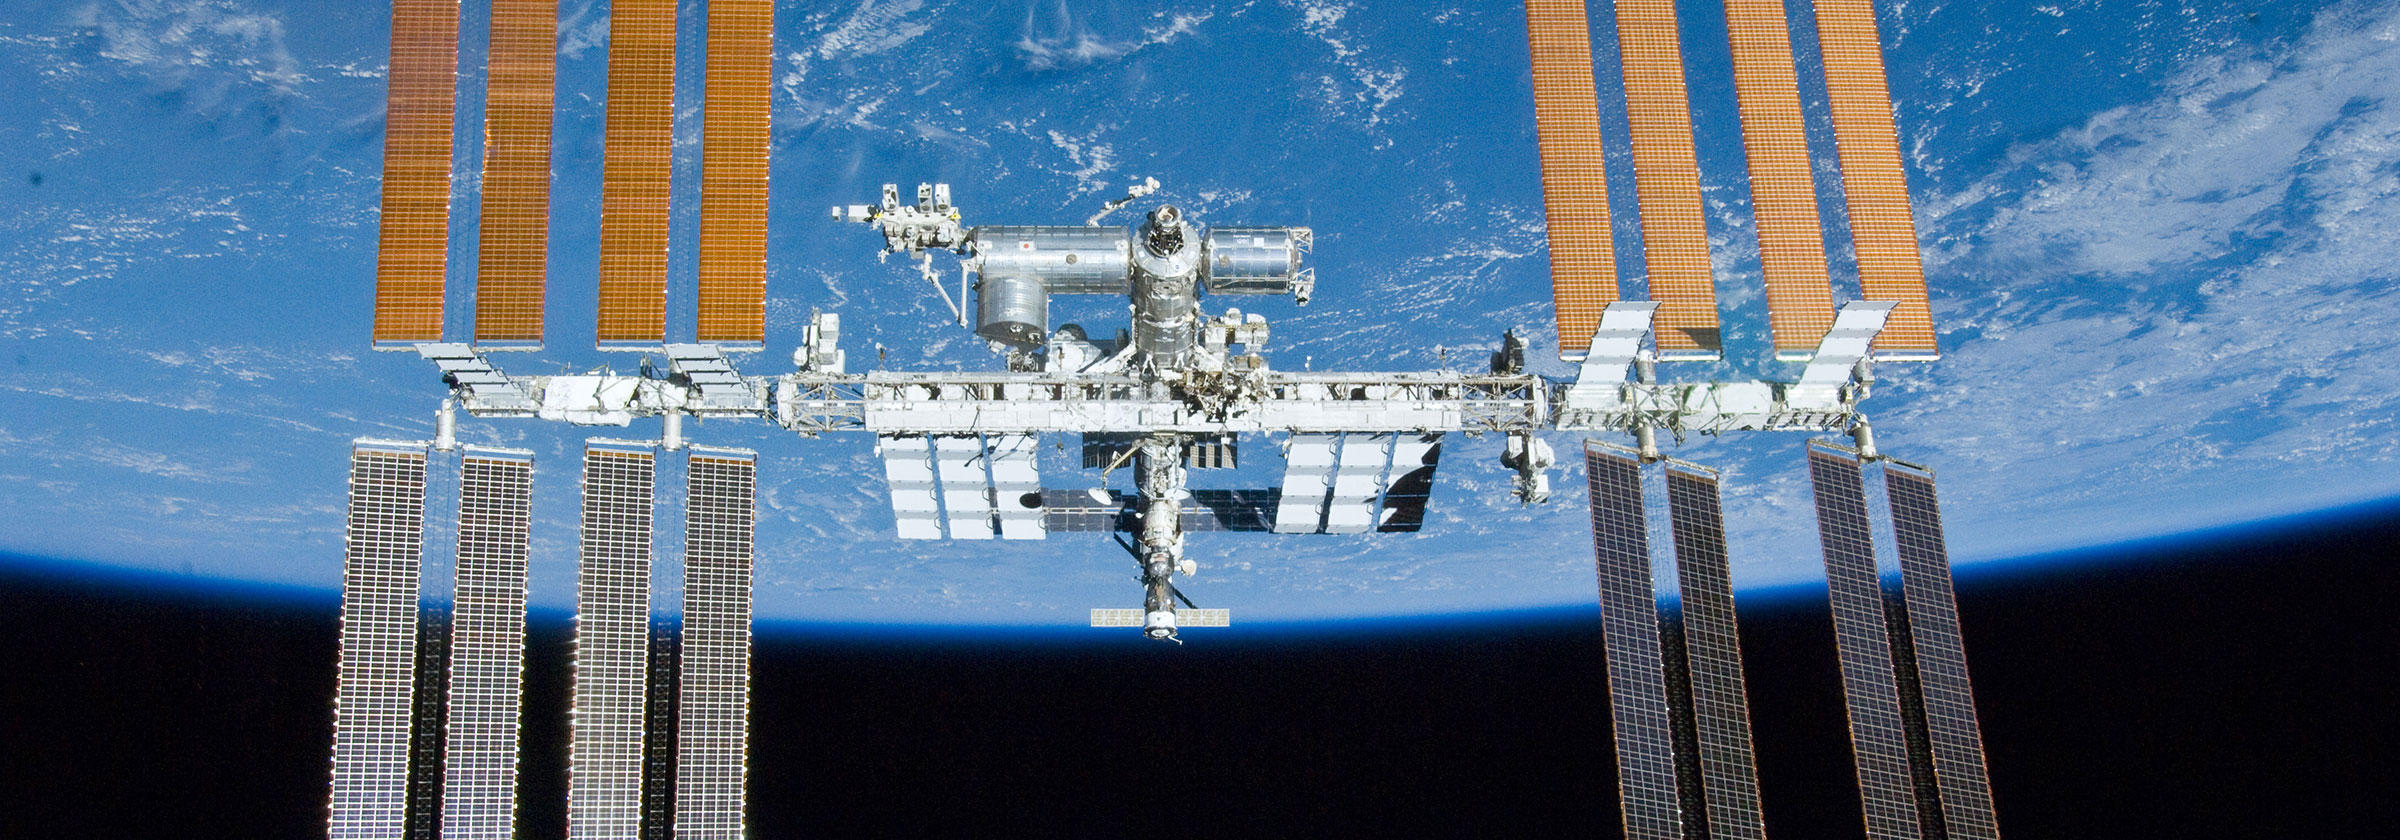 Educational Use of the International Space Station (ISS)